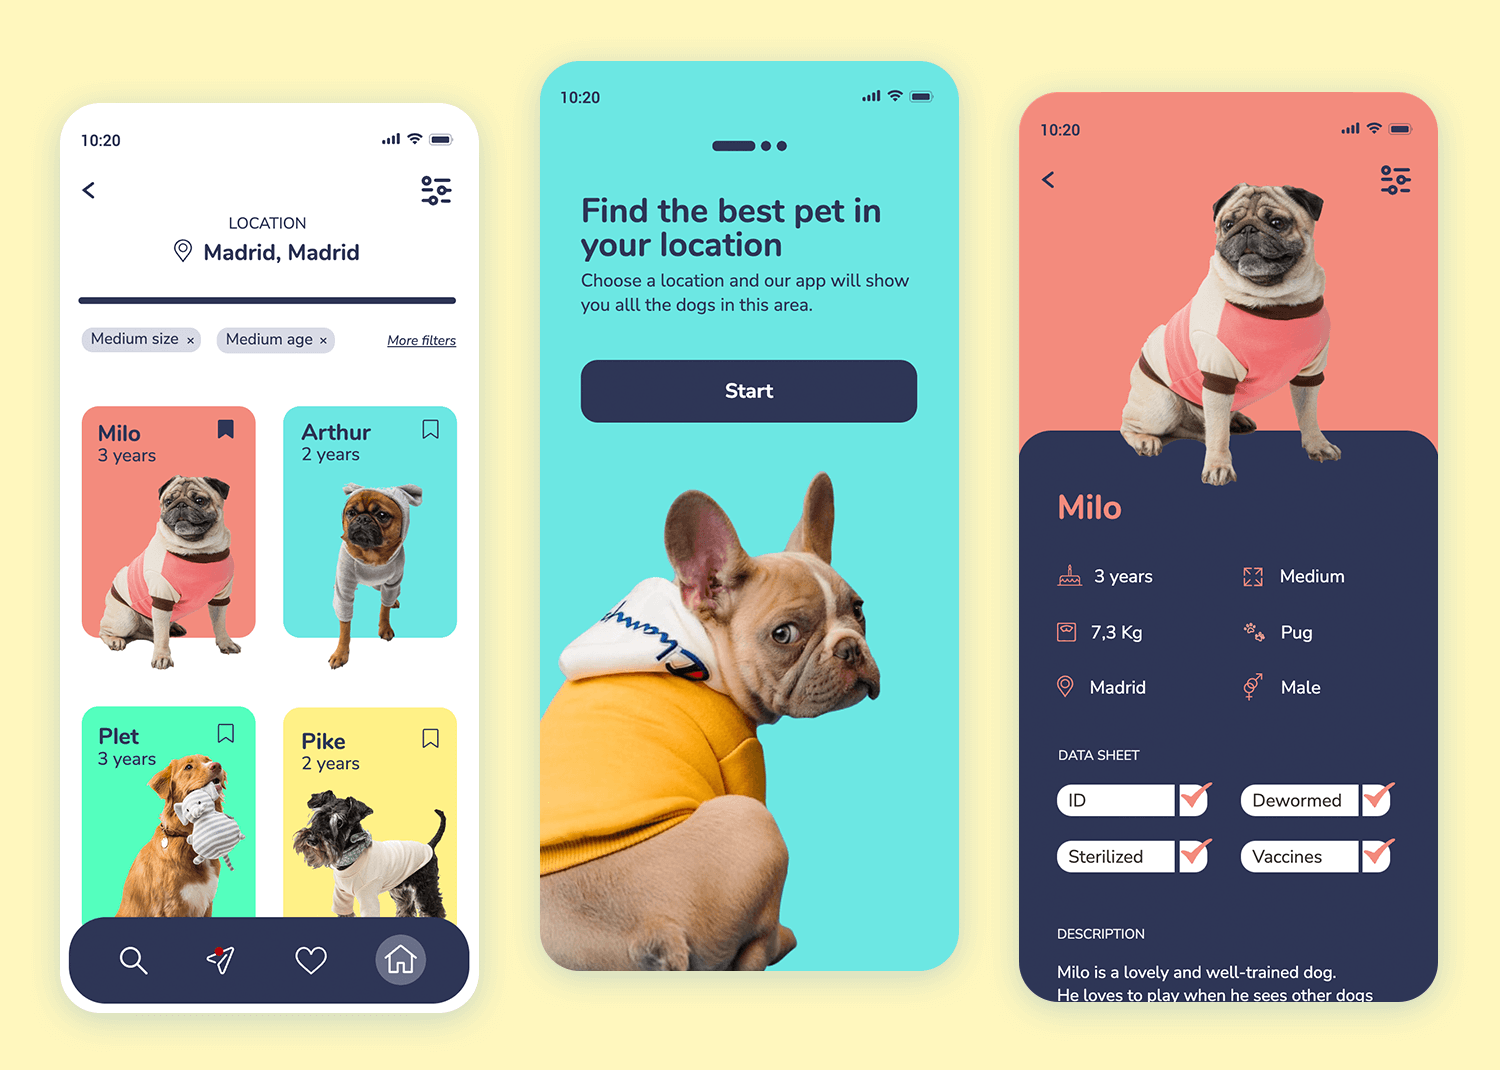 Pet adoption app mockup featuring profiles with photos, age, and location.